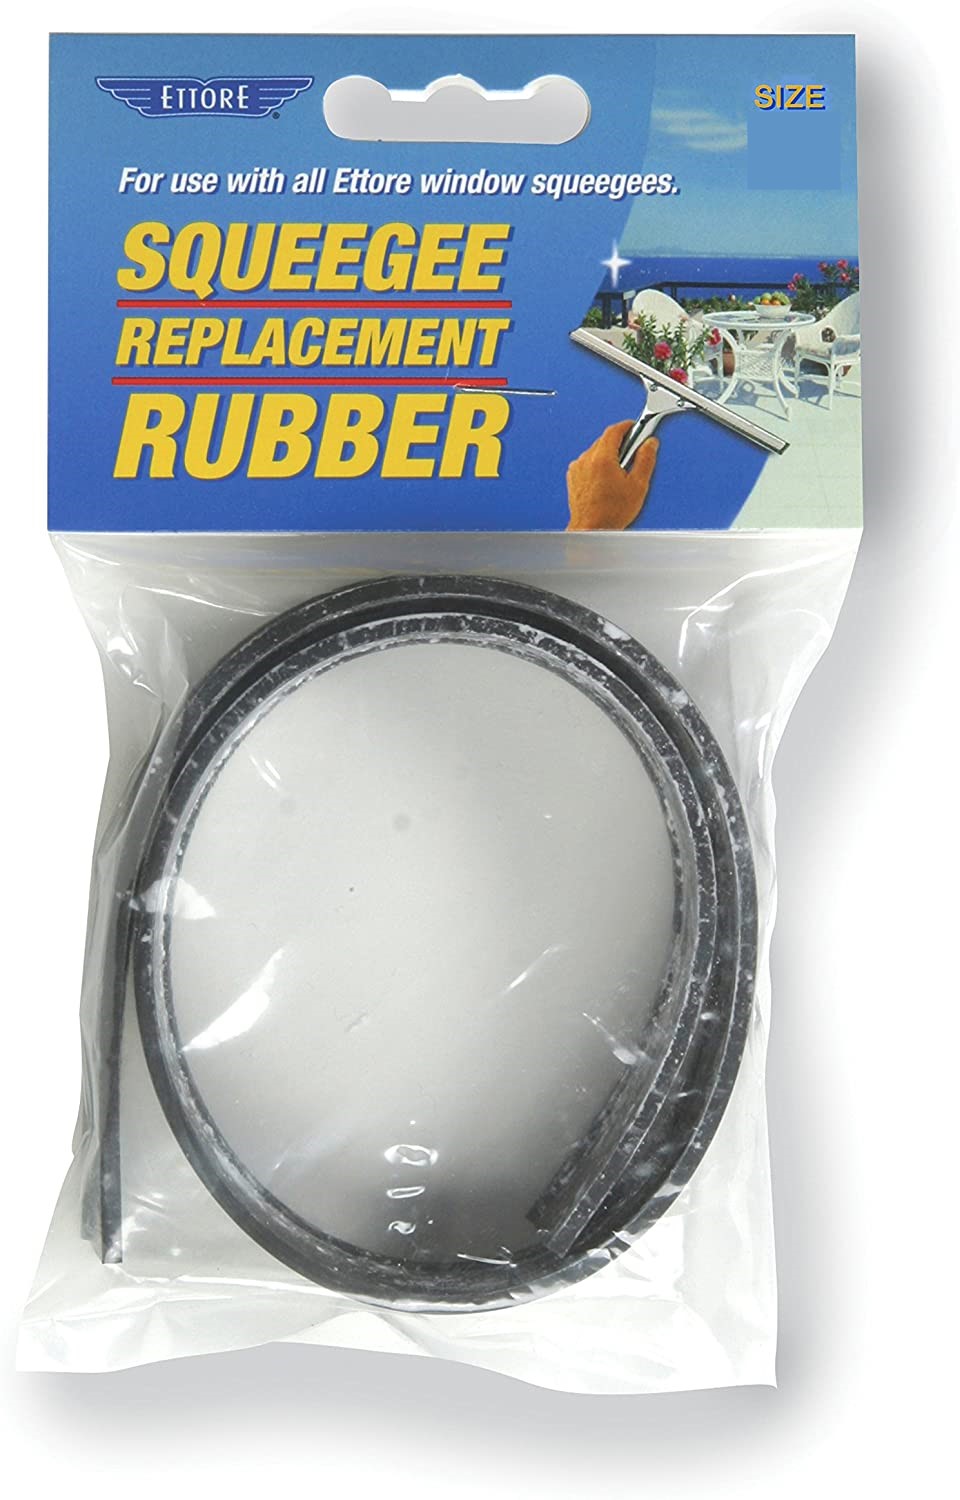 ET REPLACEMENT SQUEEGEE RUBBER 36